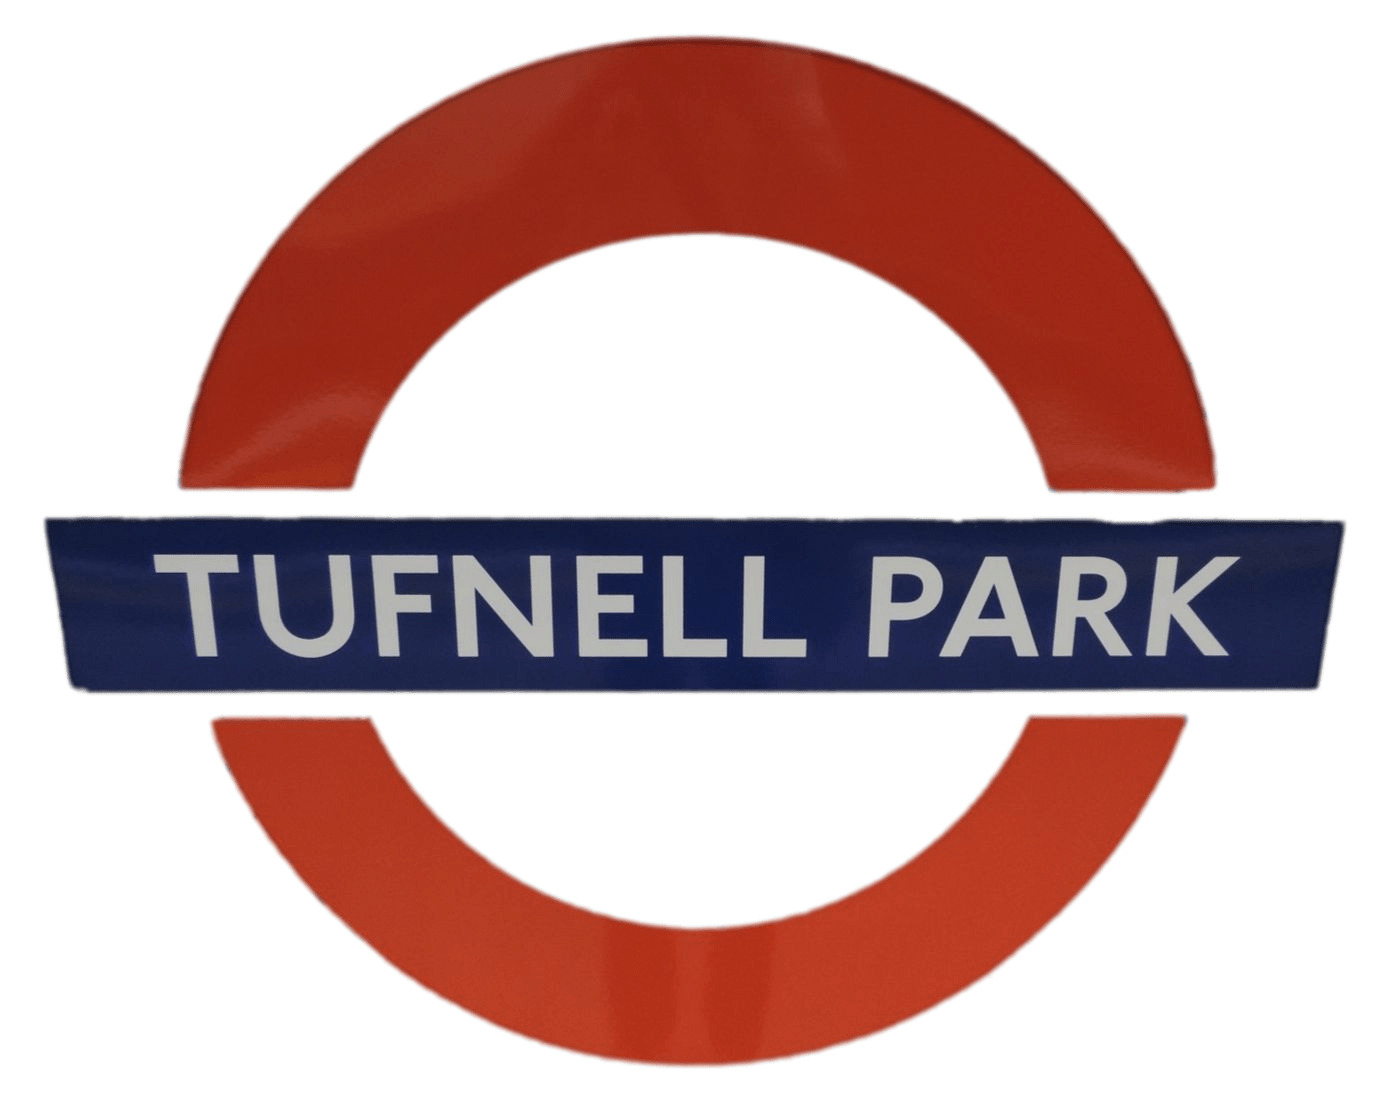 Tufnell Park icons